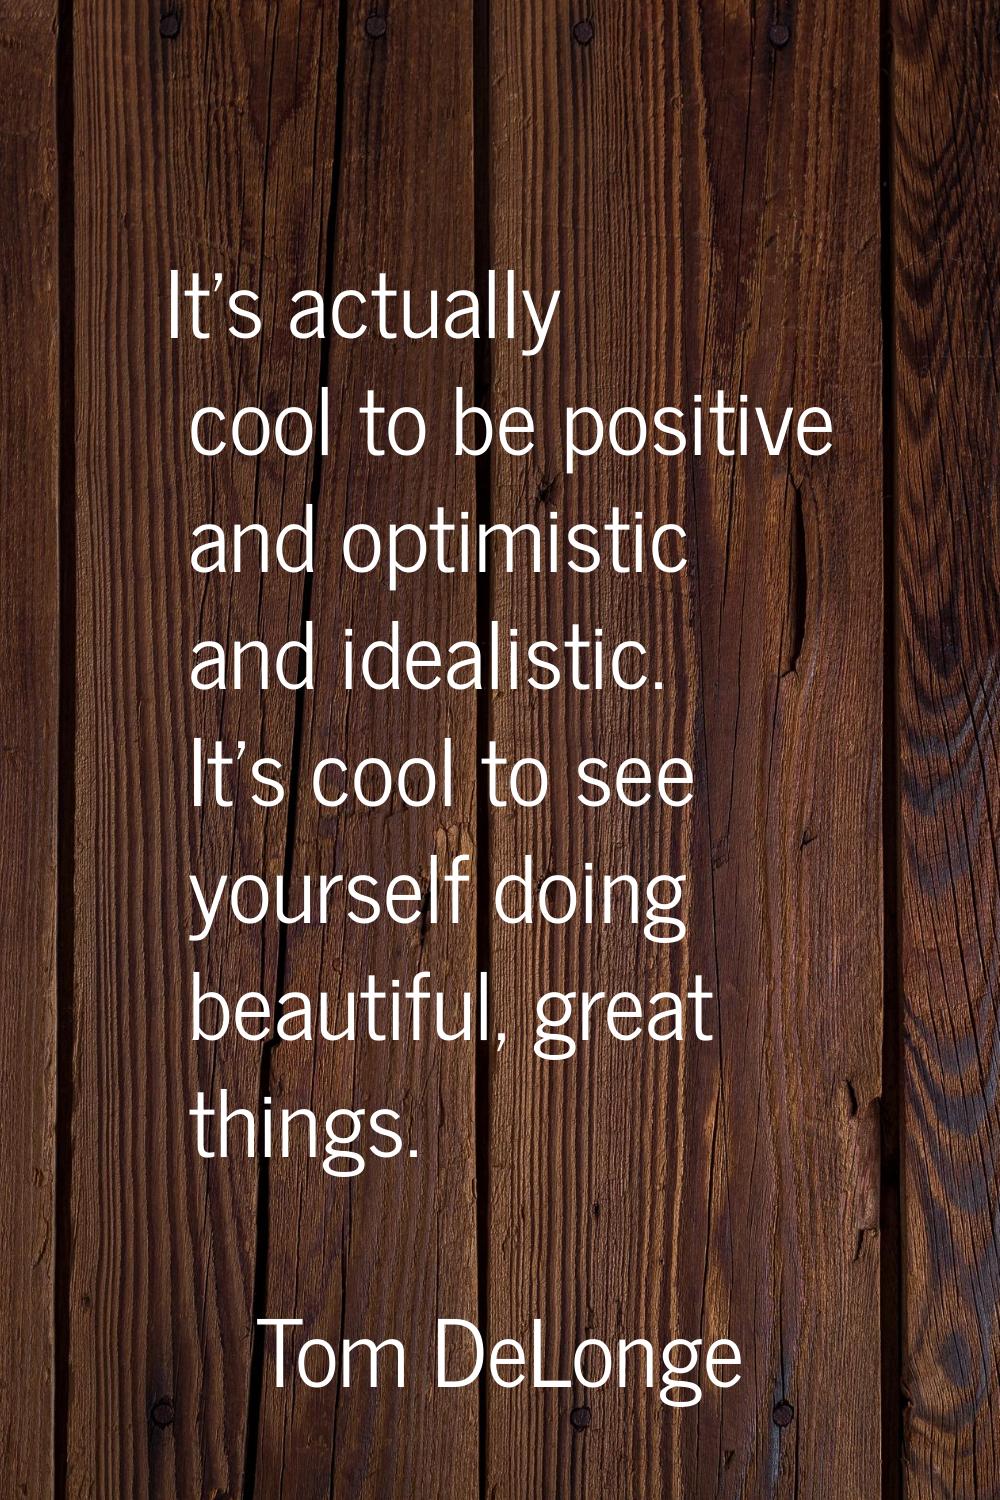 It's actually cool to be positive and optimistic and idealistic. It's cool to see yourself doing be